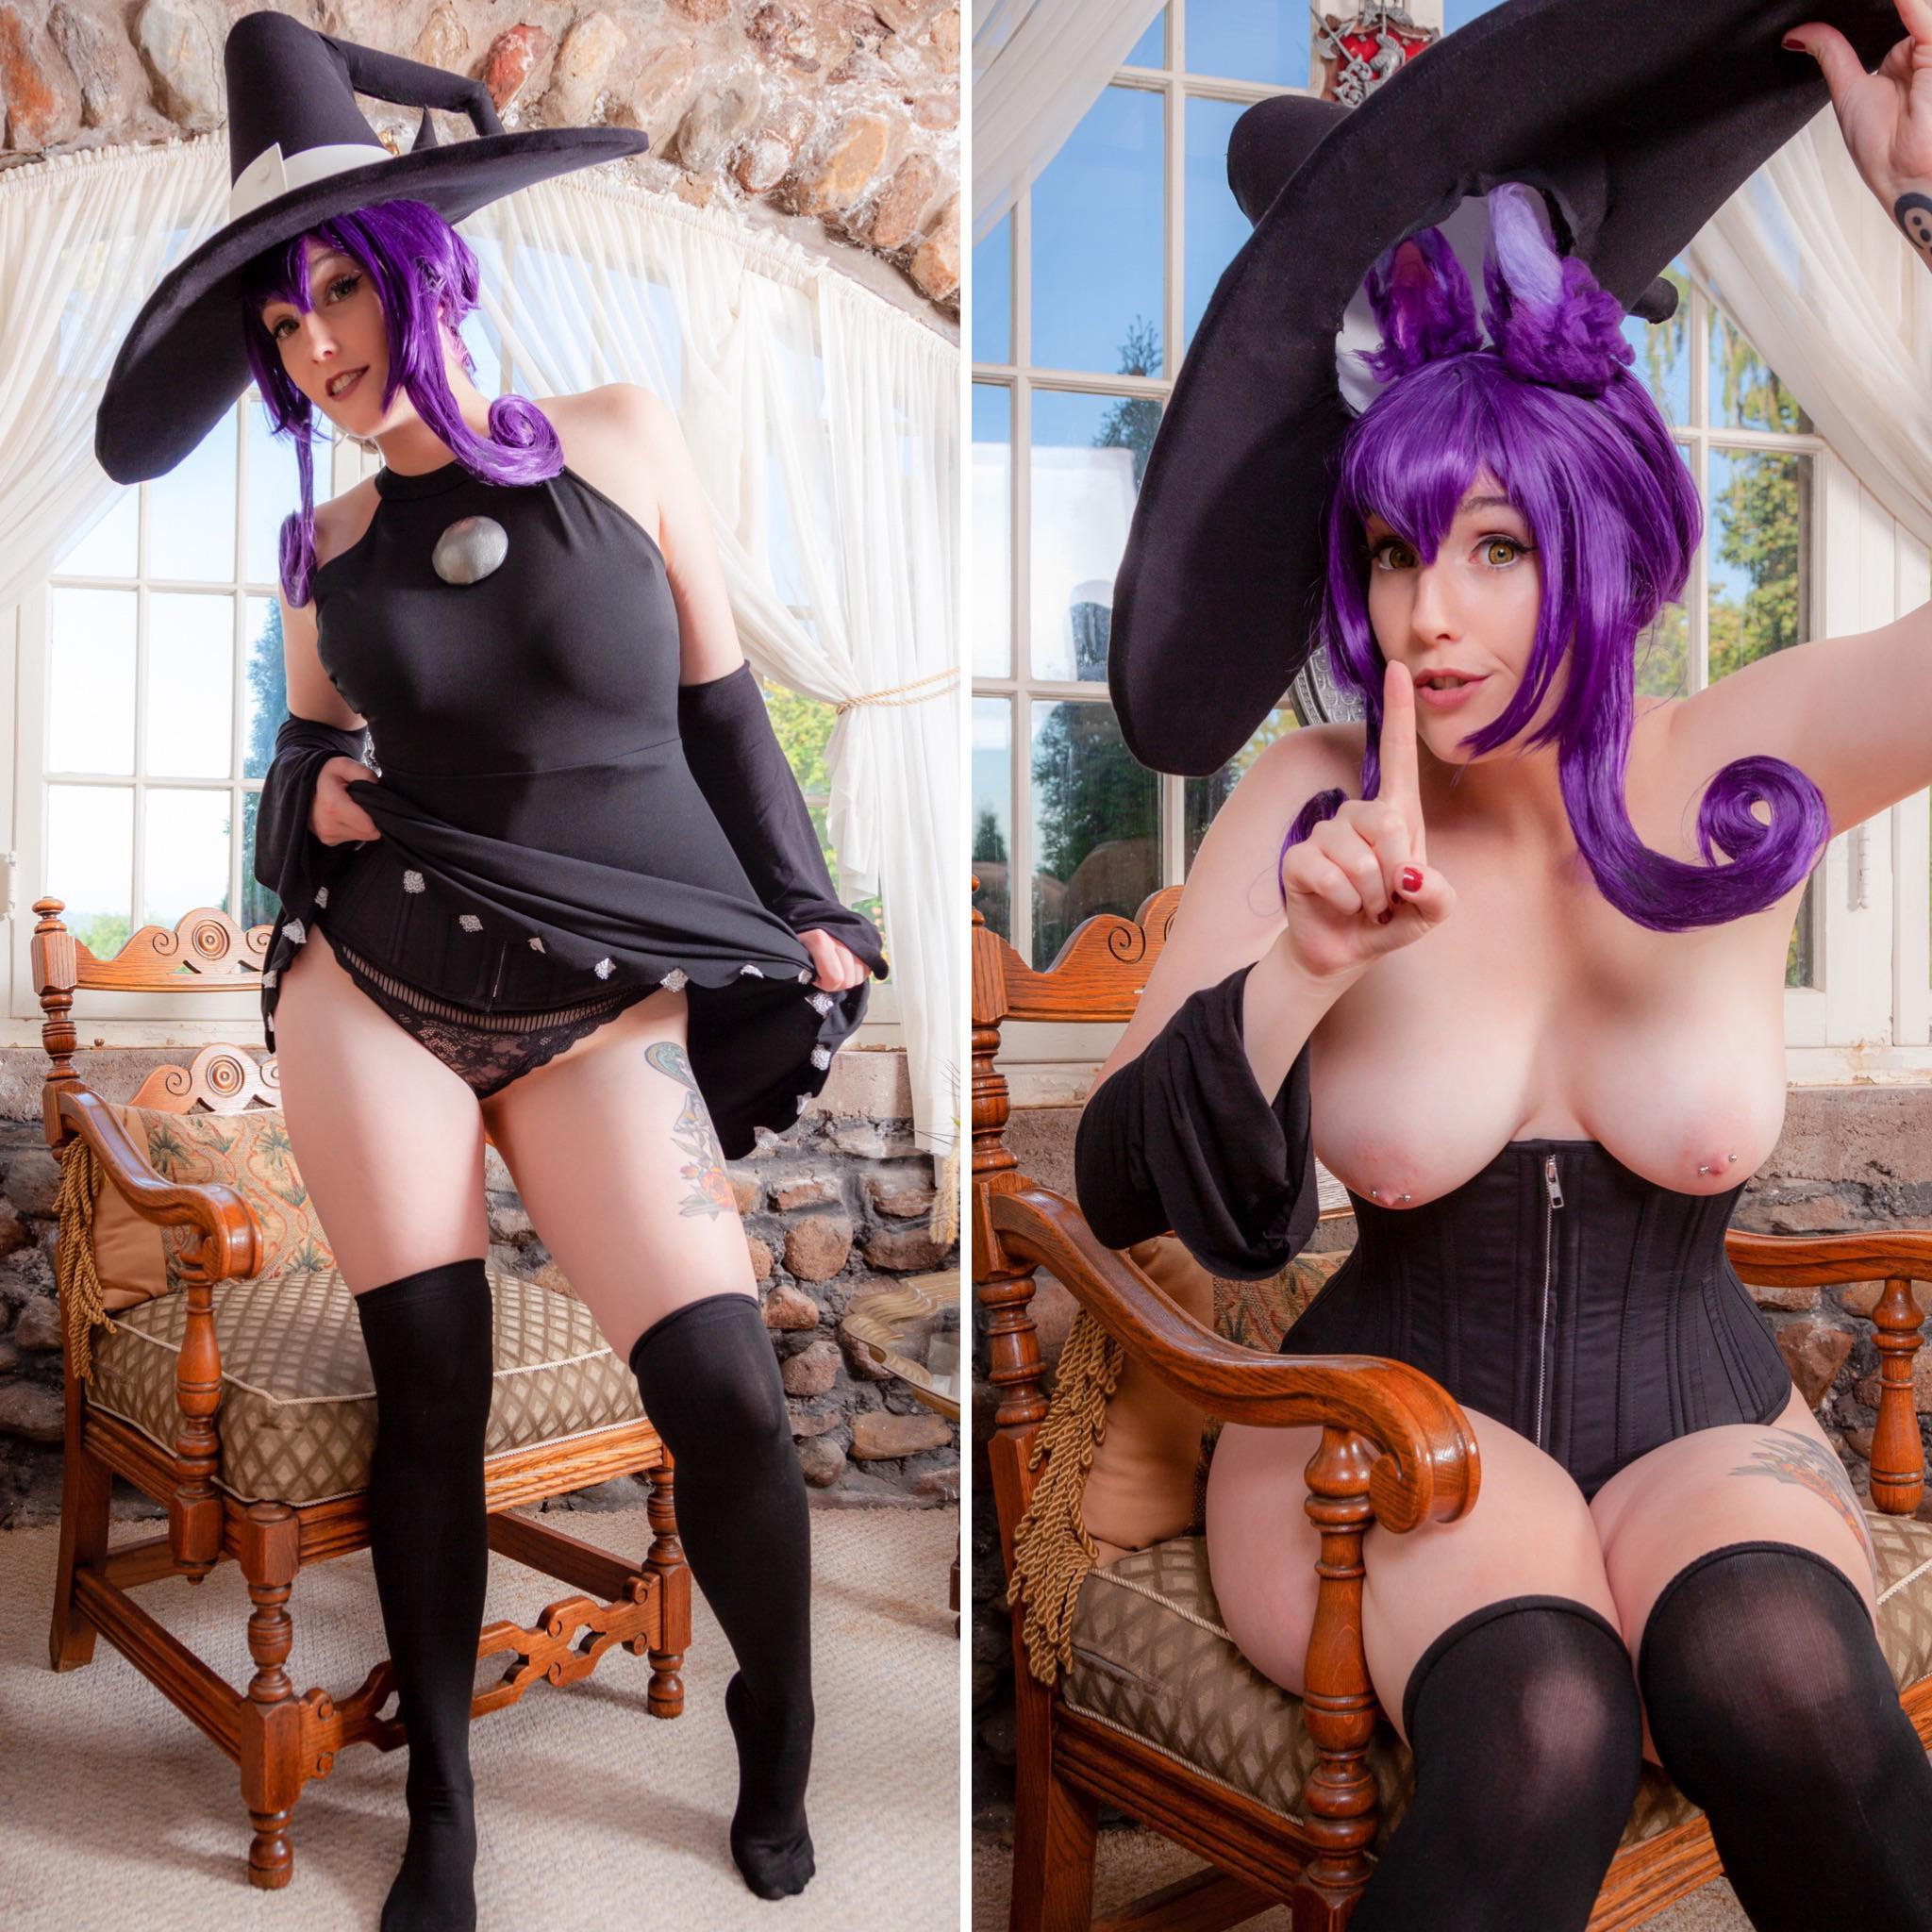 Microkitty as Blair the Witch from soul eater